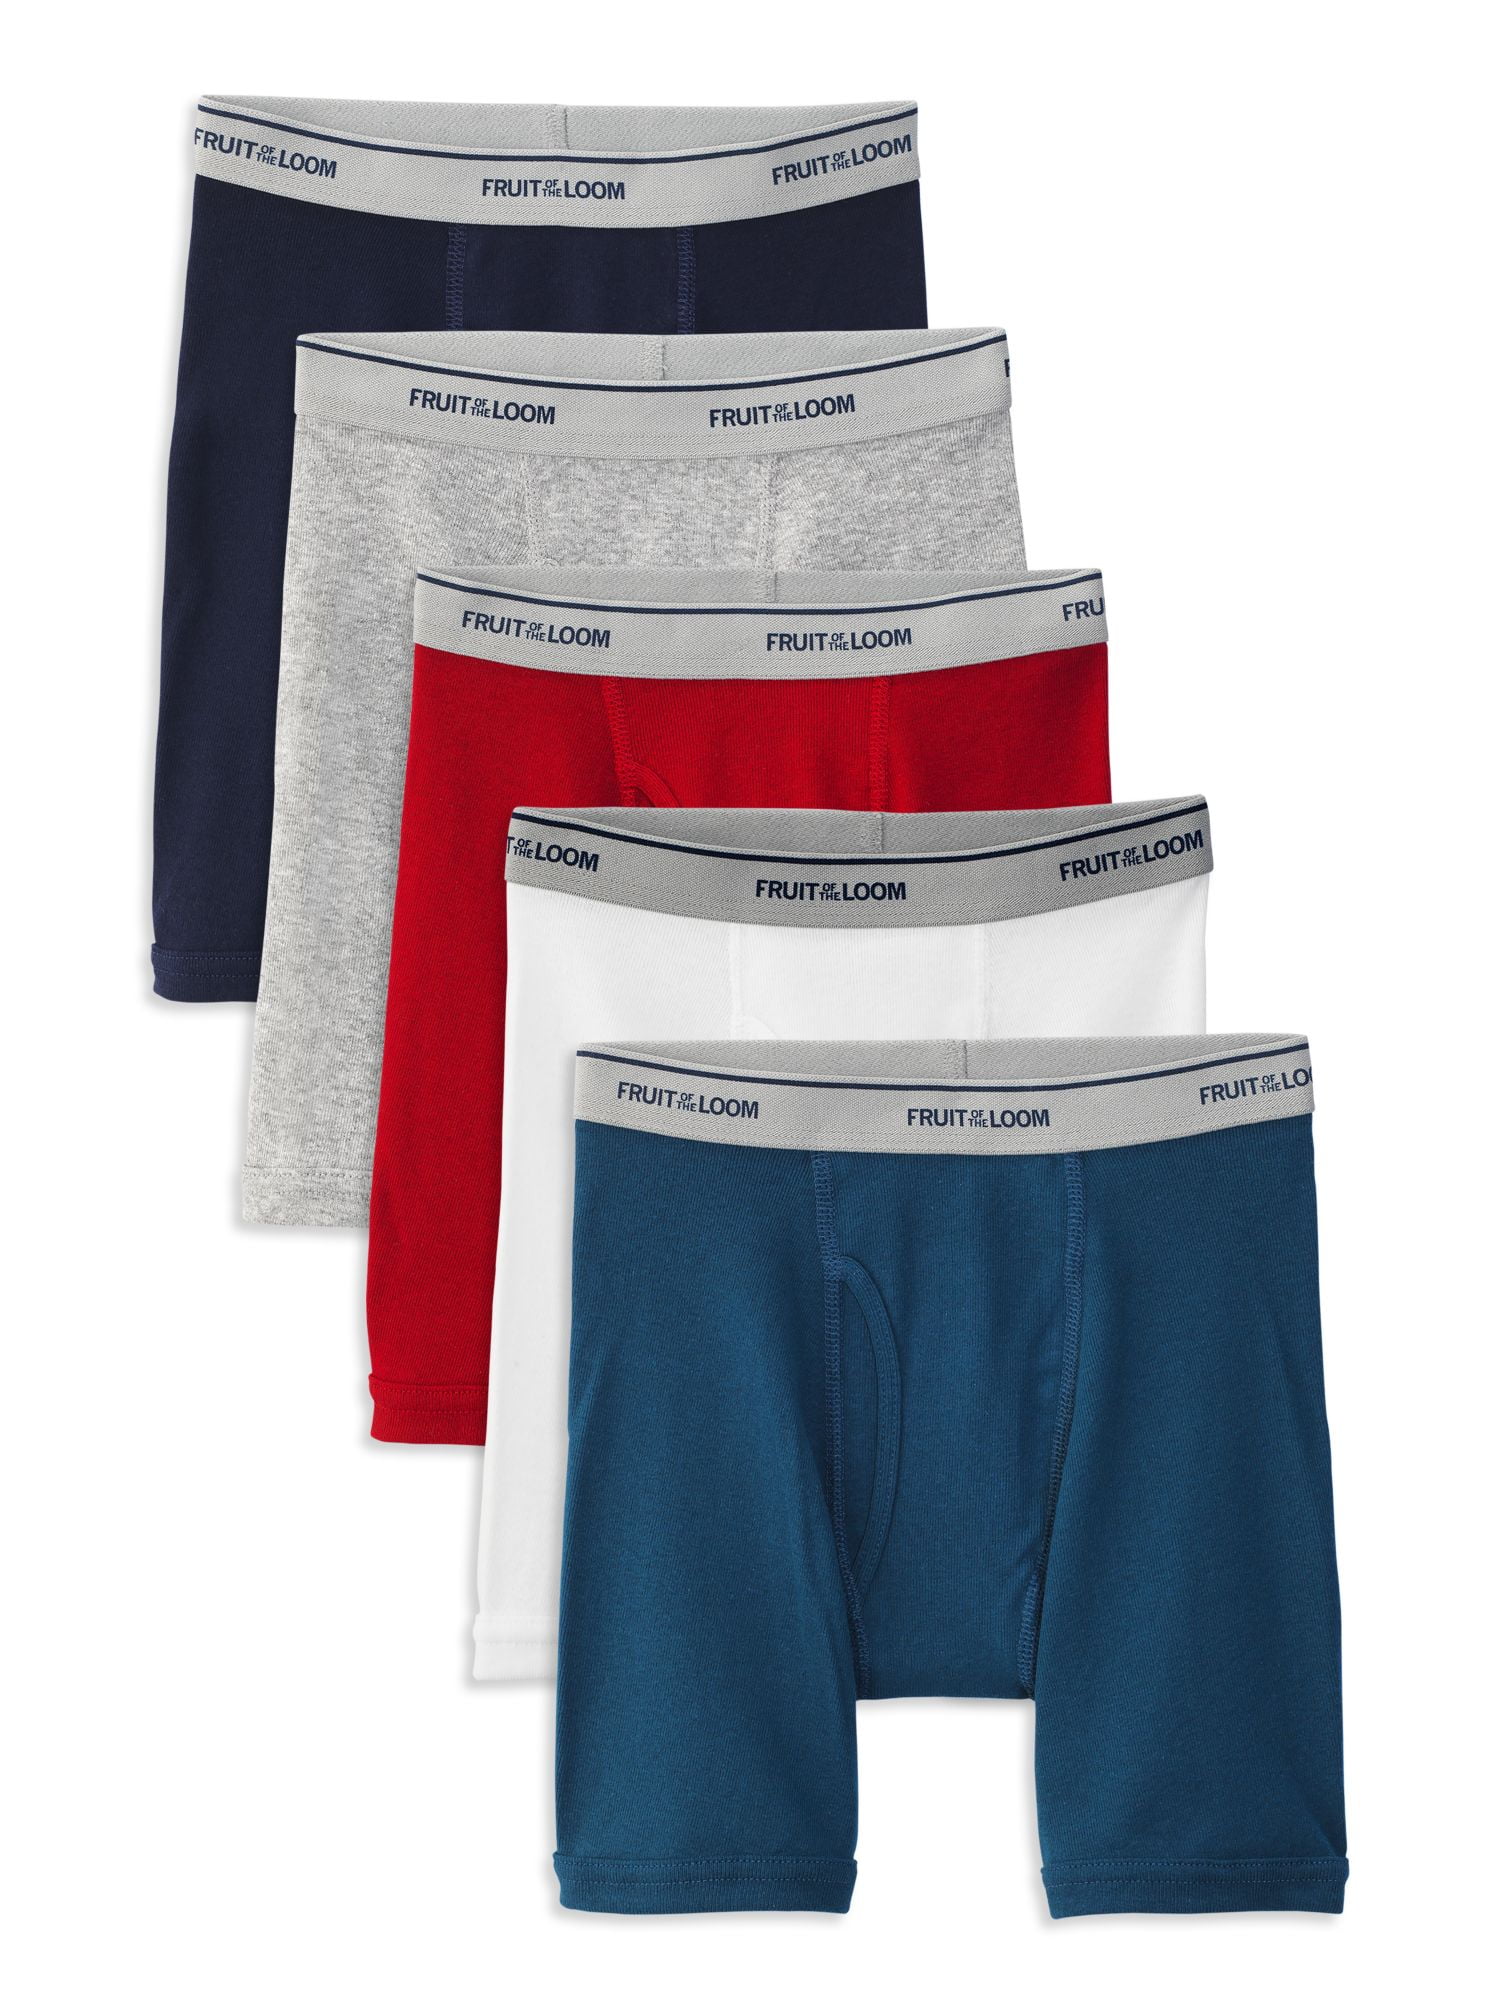 Fruit of the Loom Boys 5 Pack Assorted Print Boxer Briefs 